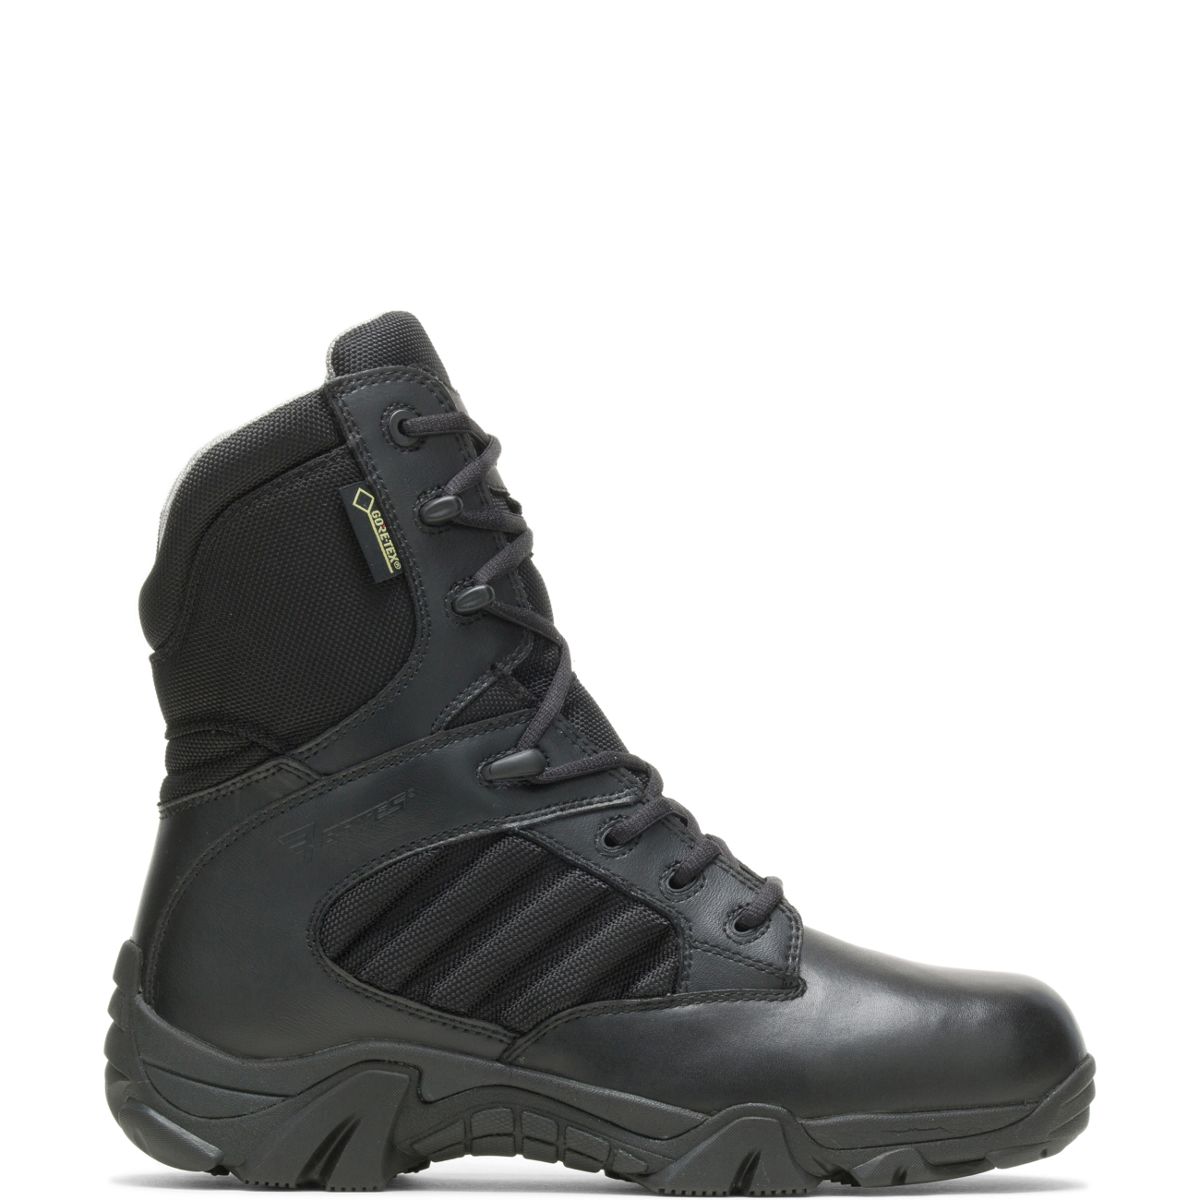 GX-8 Insulated Side Zip with GORE-TEX® - Tactical | Wolverine Footwear